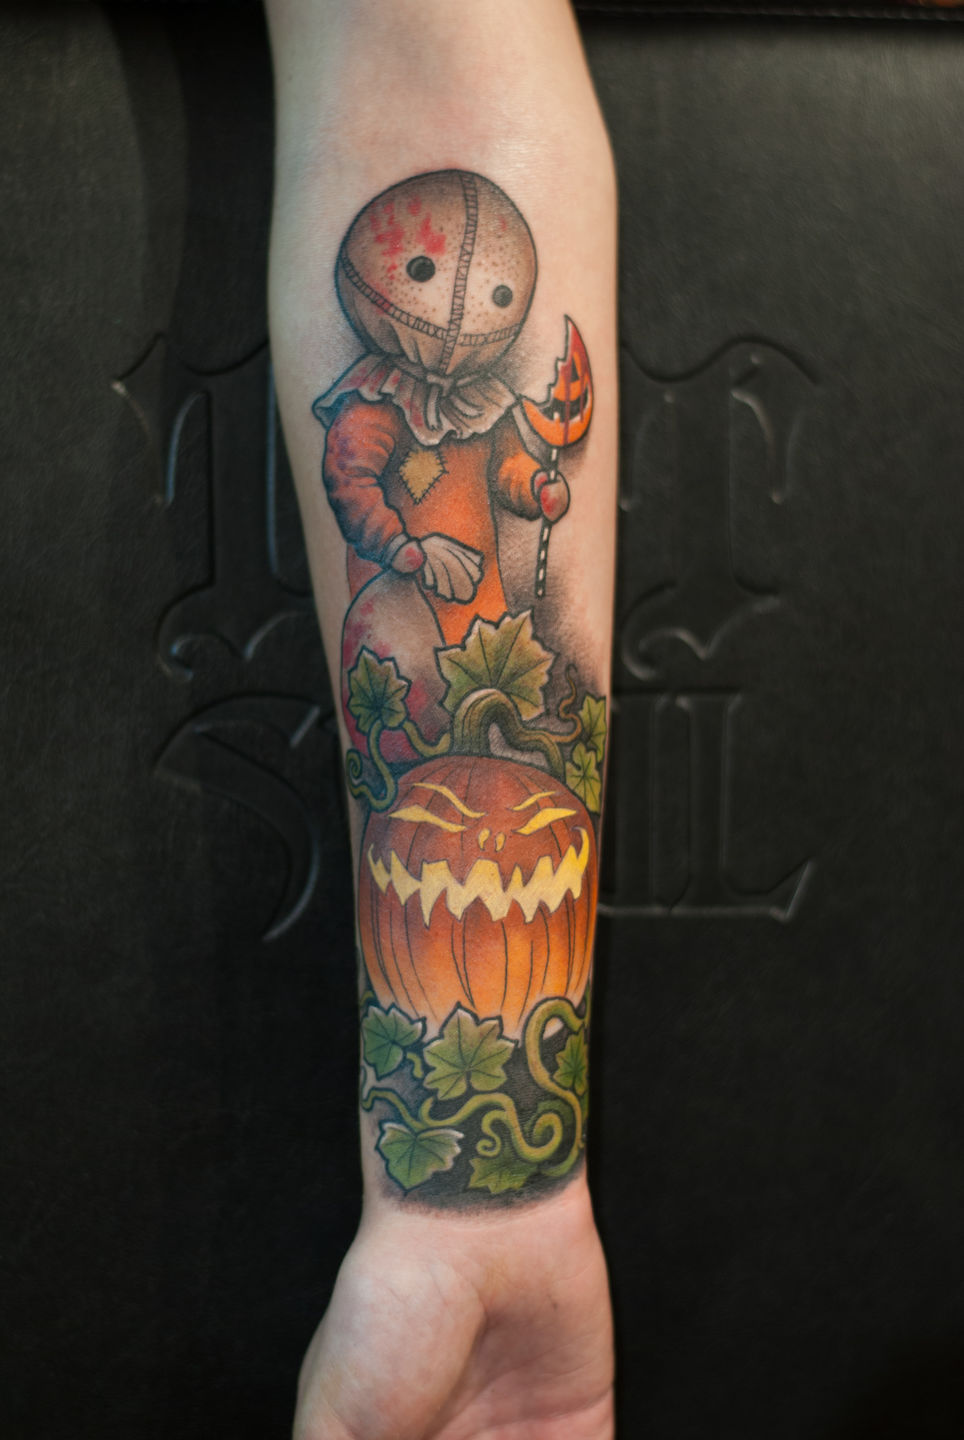 Tricky Sam from Trick r Treat done by Jt jtshaw fltnyf  Flickr